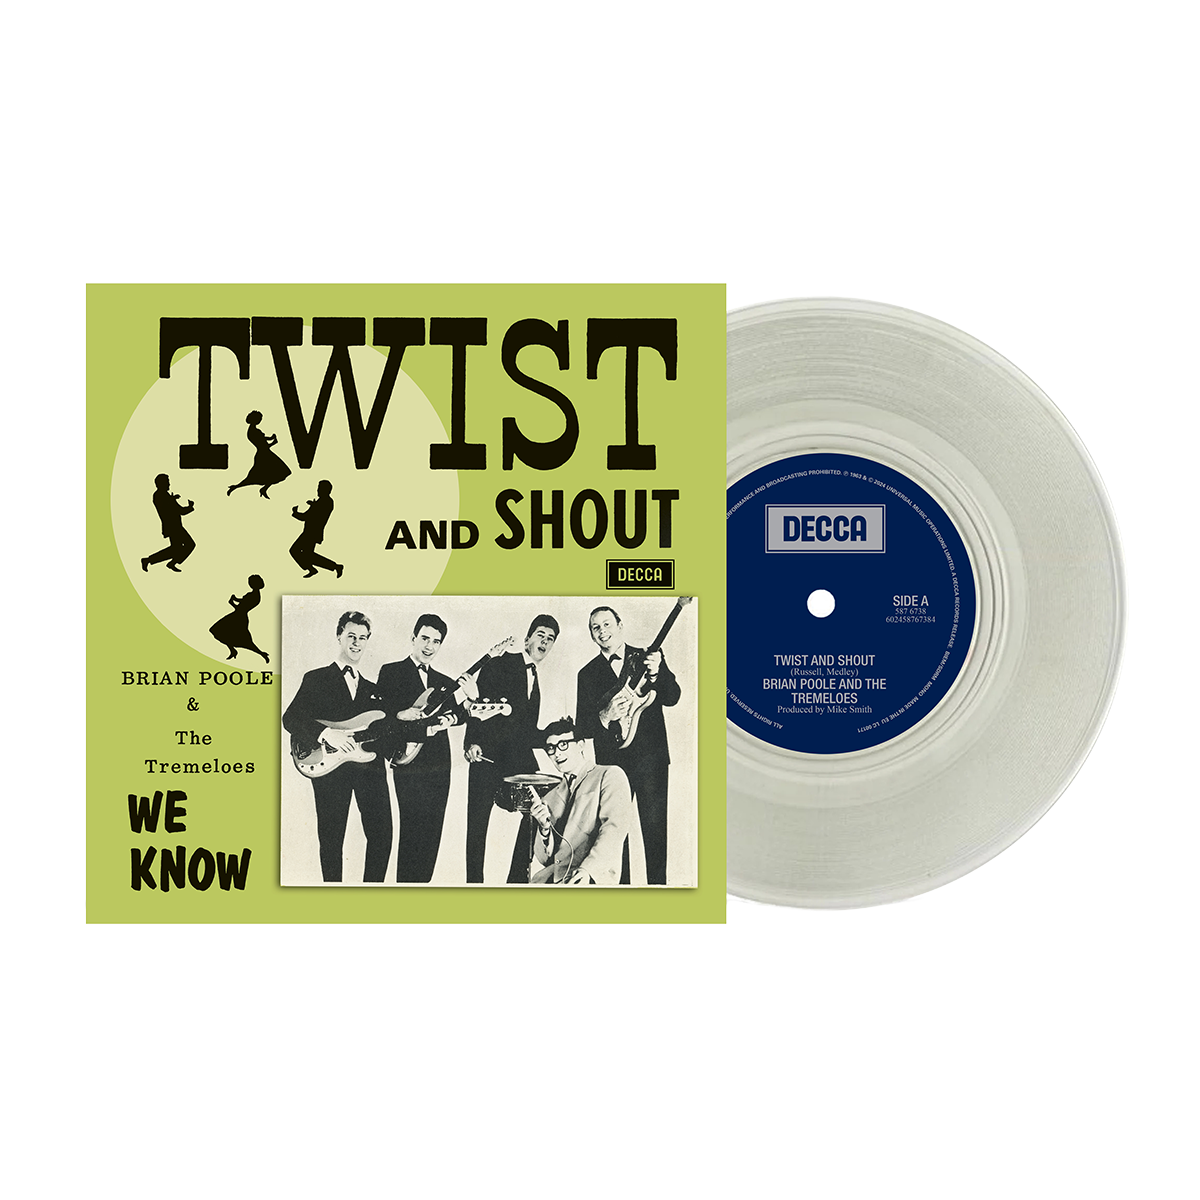 Brian Poole & The Tremeloes - Twist & Shout: Limited Clear Vinyl 7" Single [RSD24]